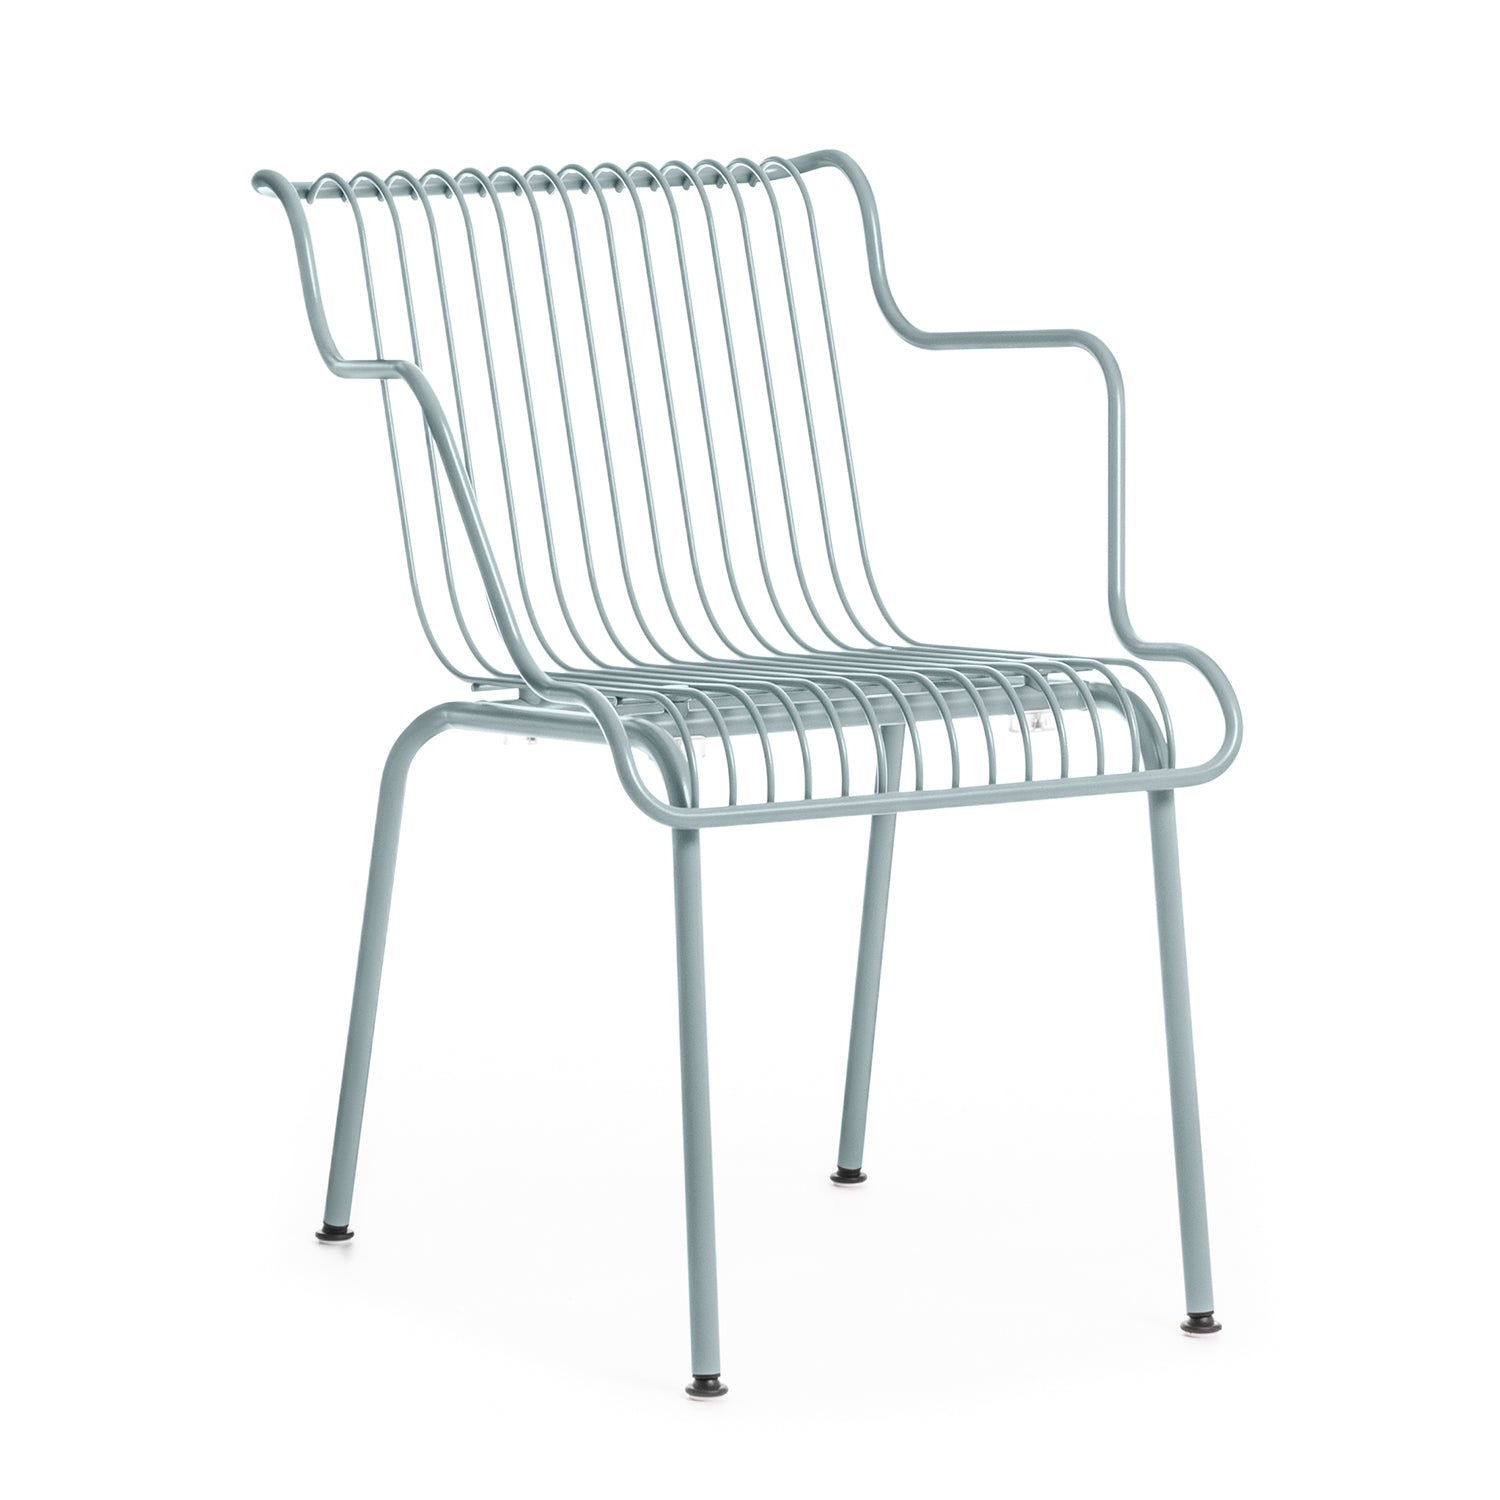 Magis South Dining Armchair in light blue